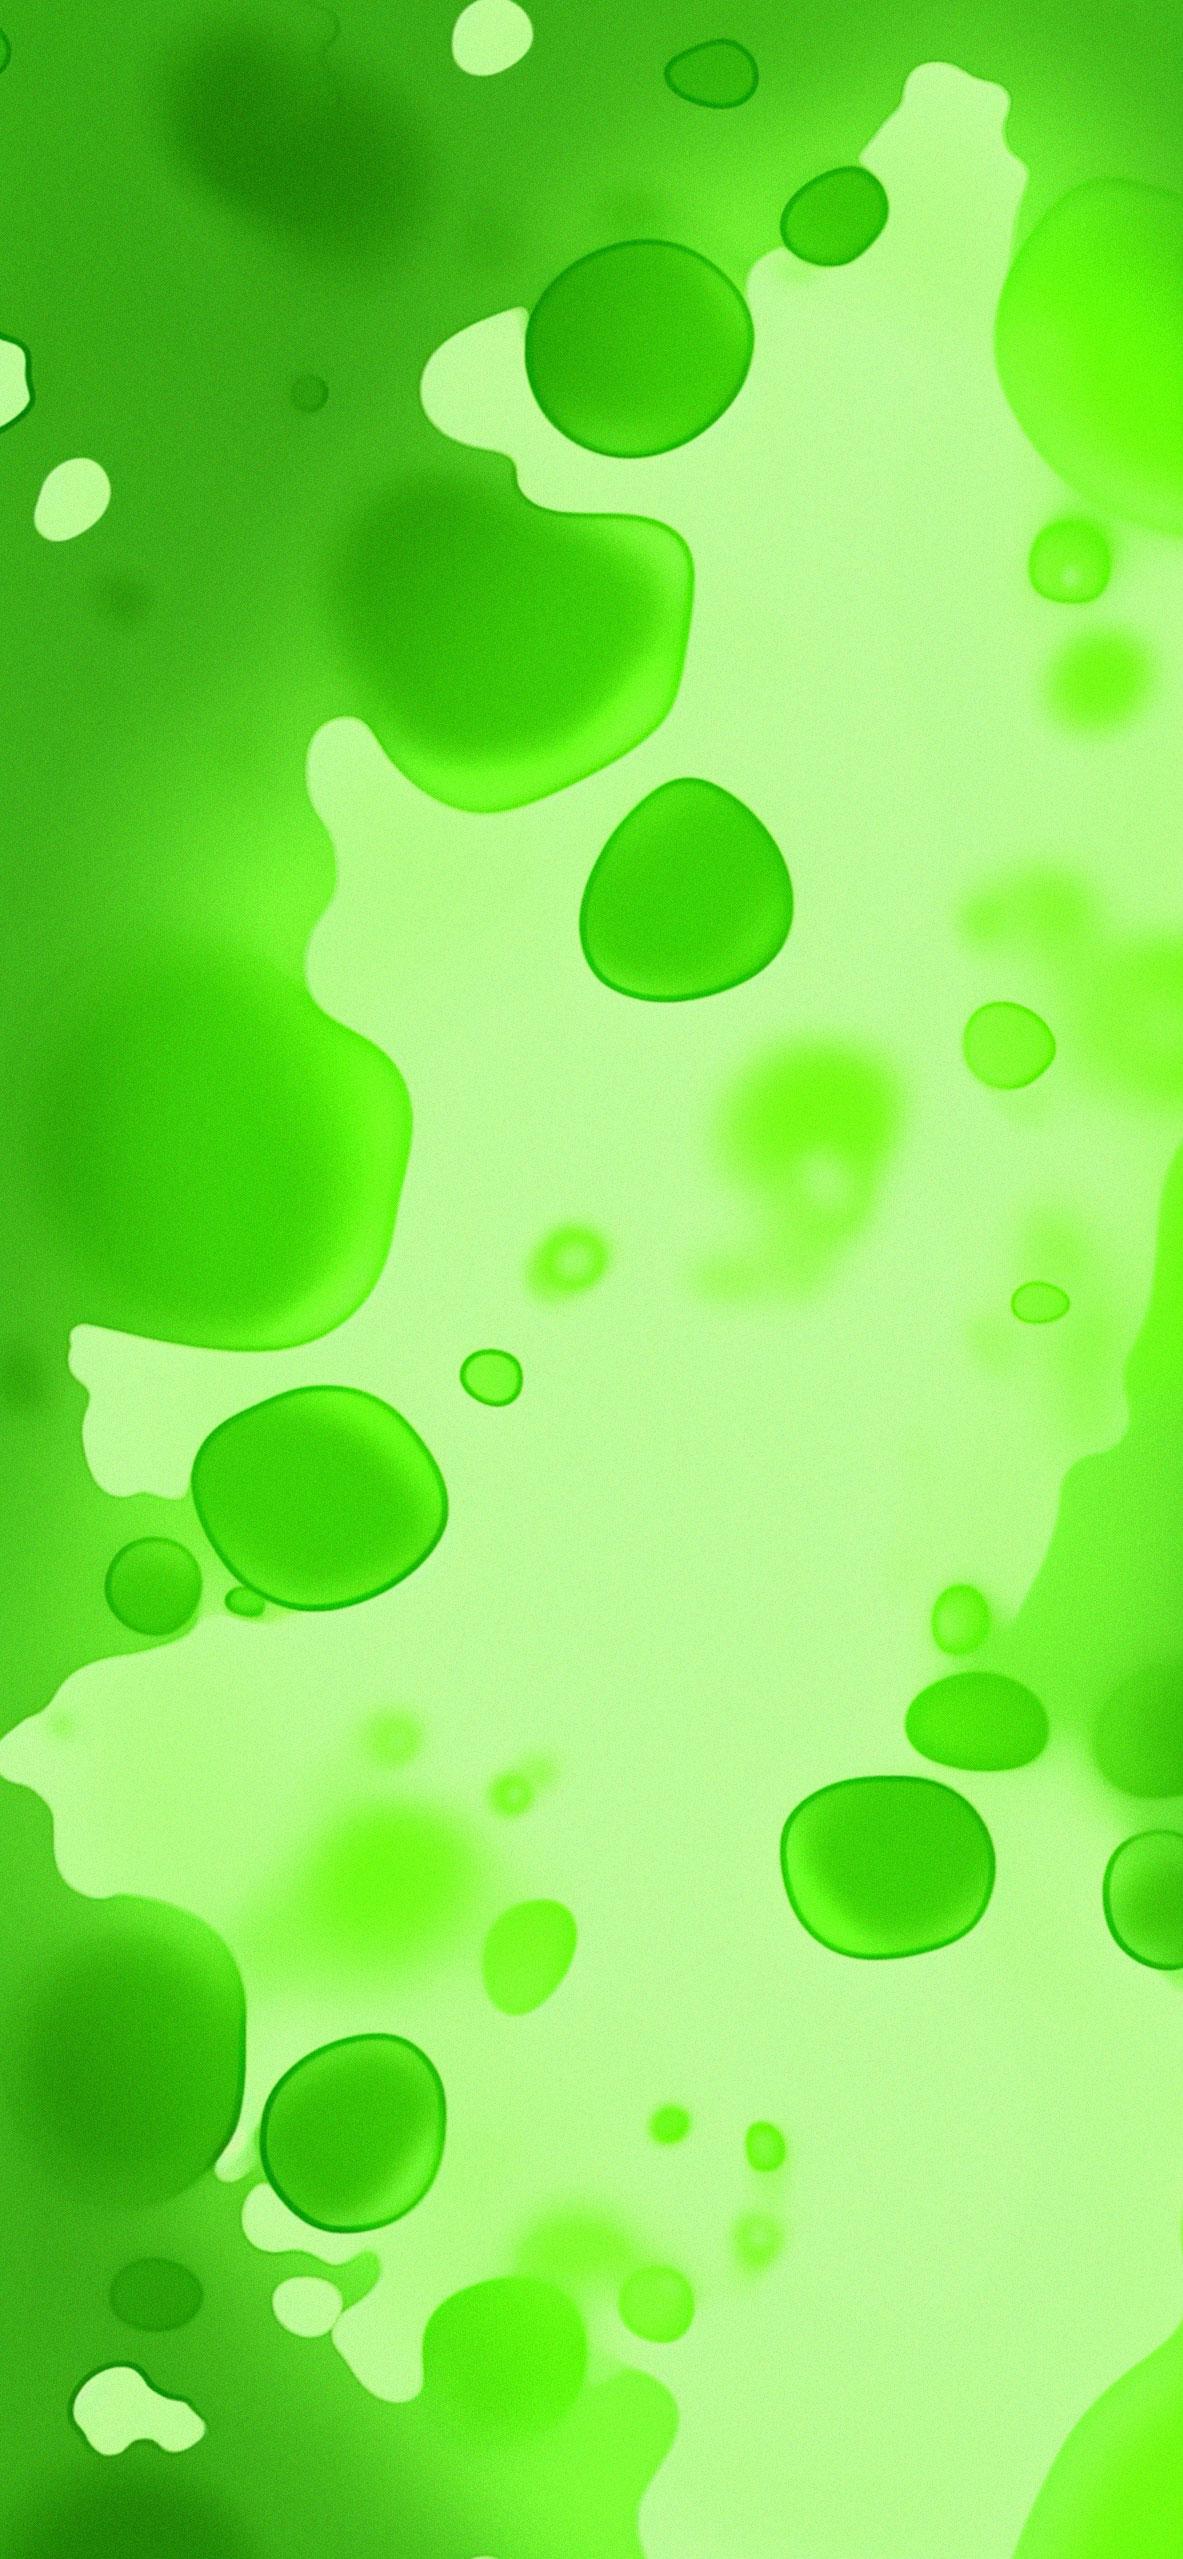 Green Acid Toxic Wallpaper Aesthetic For iPhone